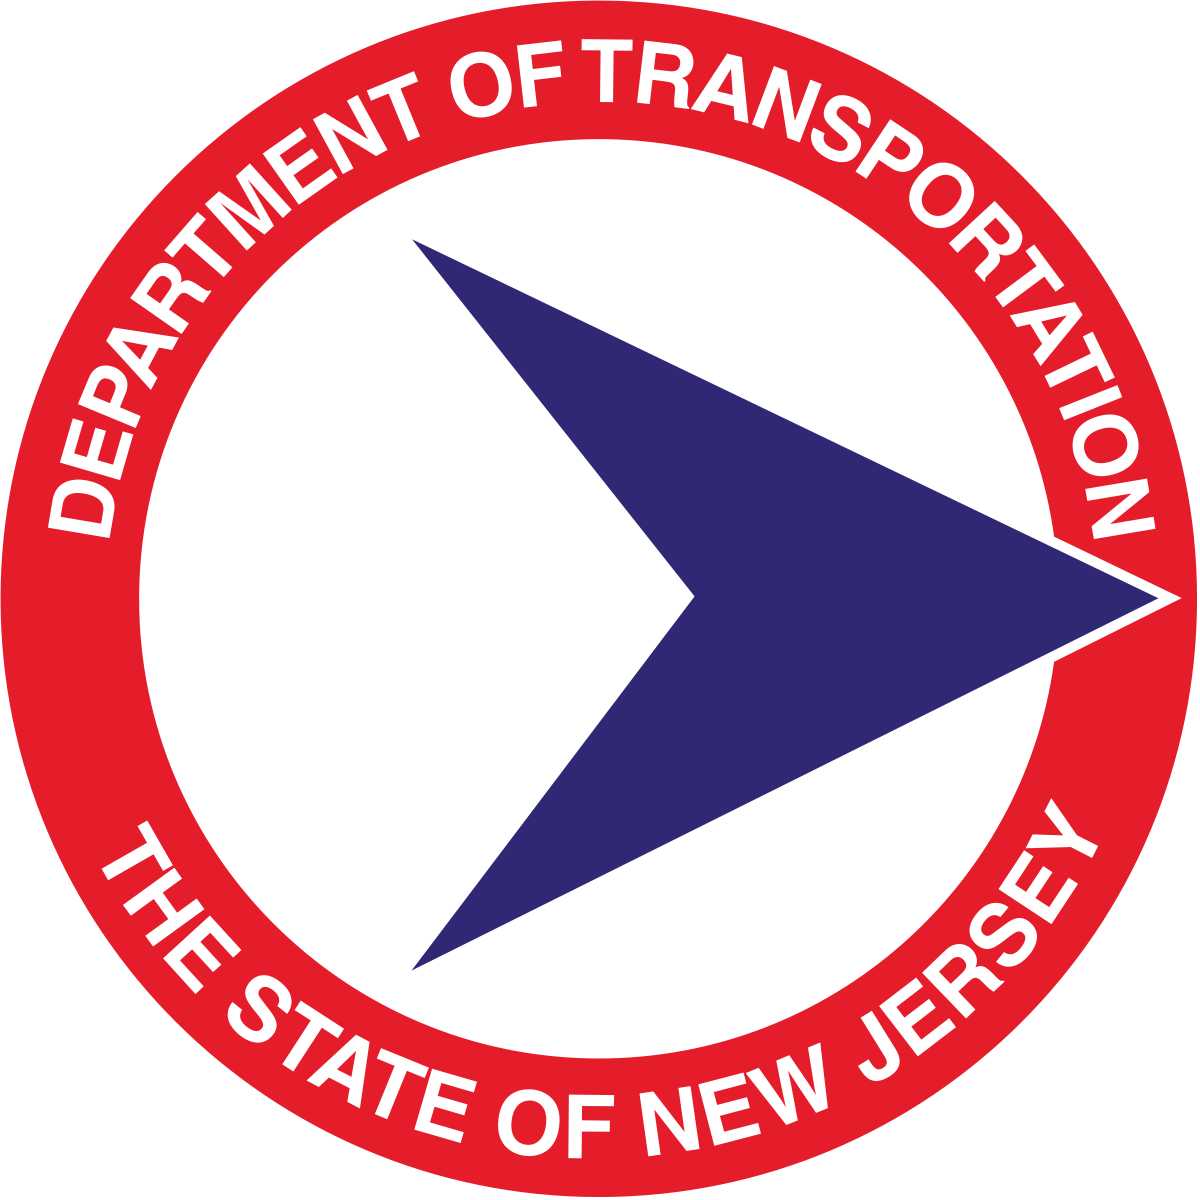 The New Jersey Department of Transportation